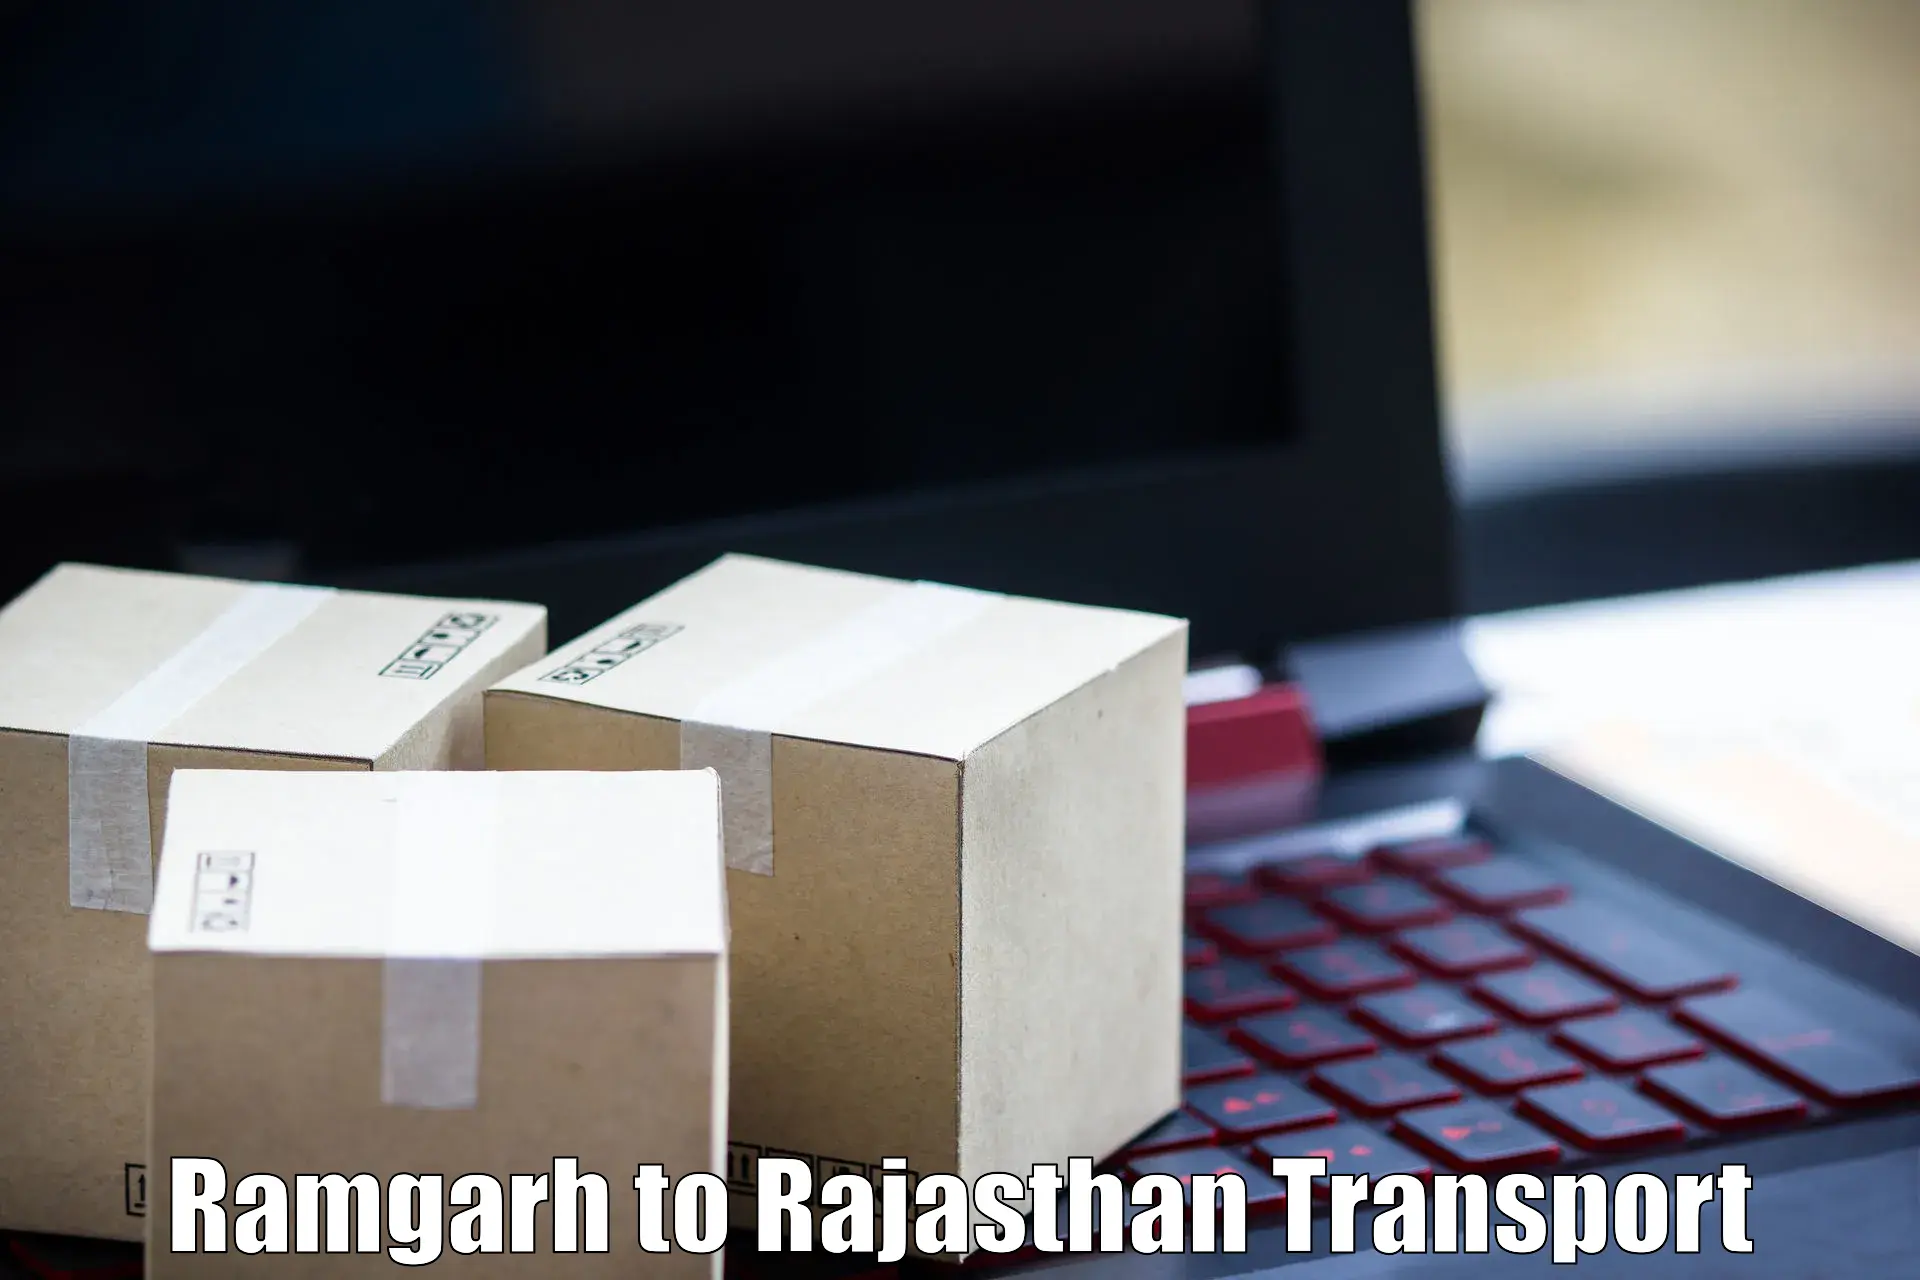 Daily parcel service transport Ramgarh to Rajasthan